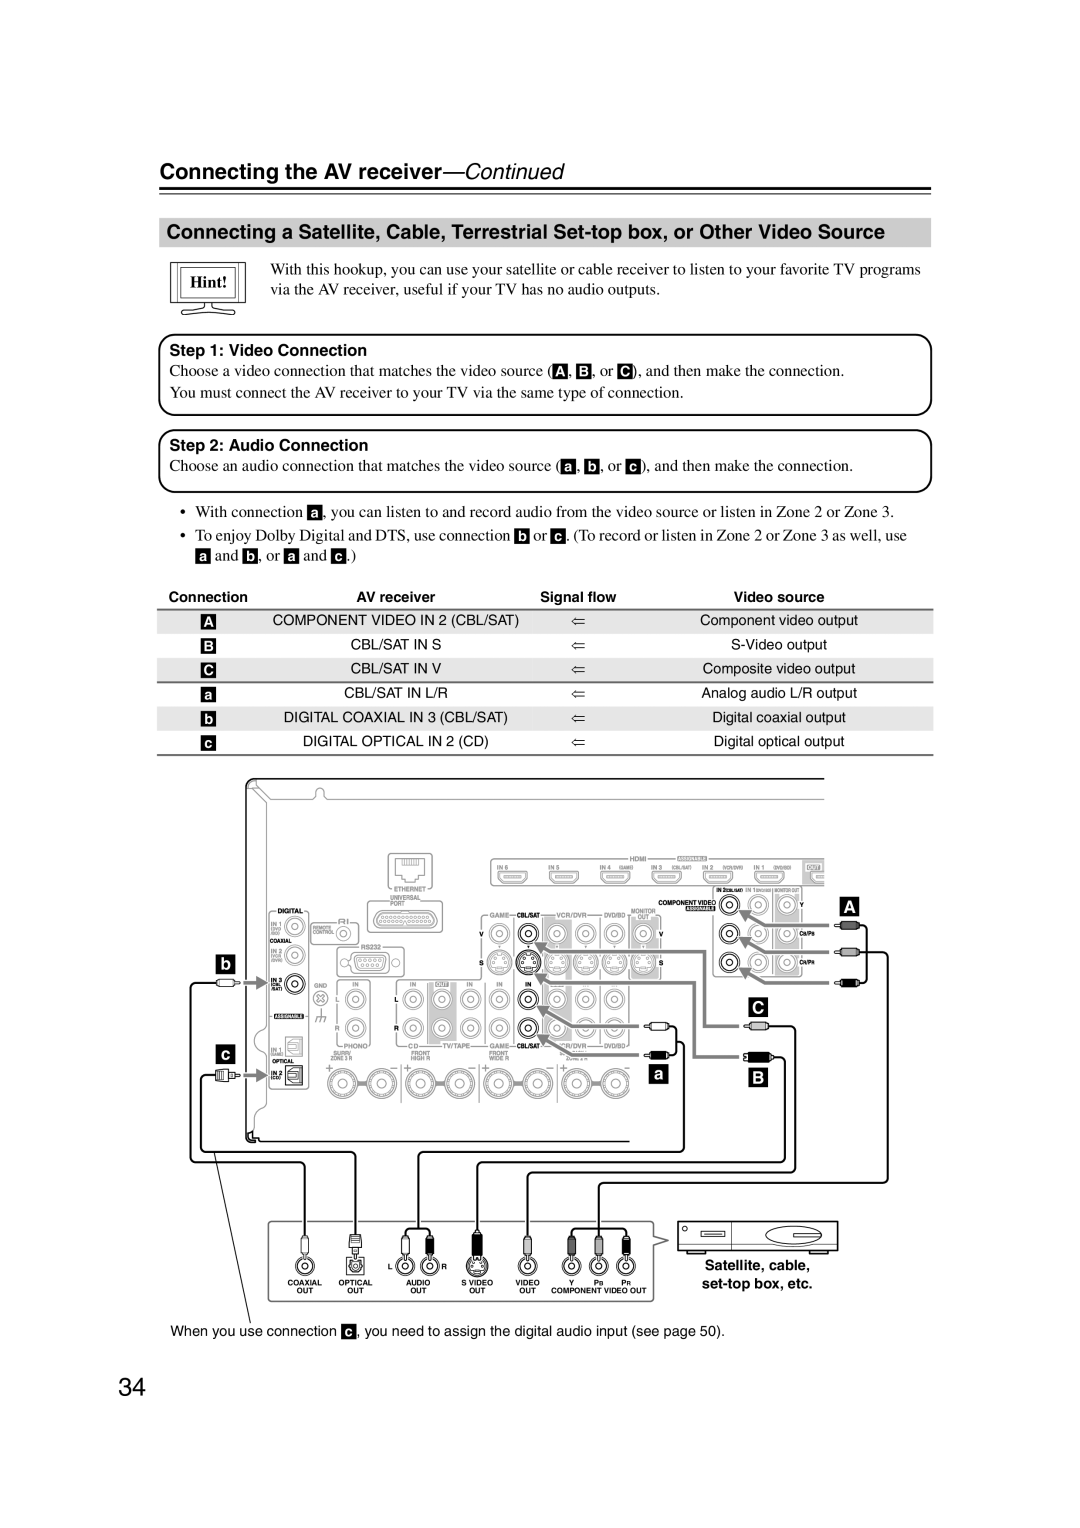 Onkyo HT-RC180, 29400021, TX-NR807 instruction manual Connecting the AV receiver—Continued, Hint 